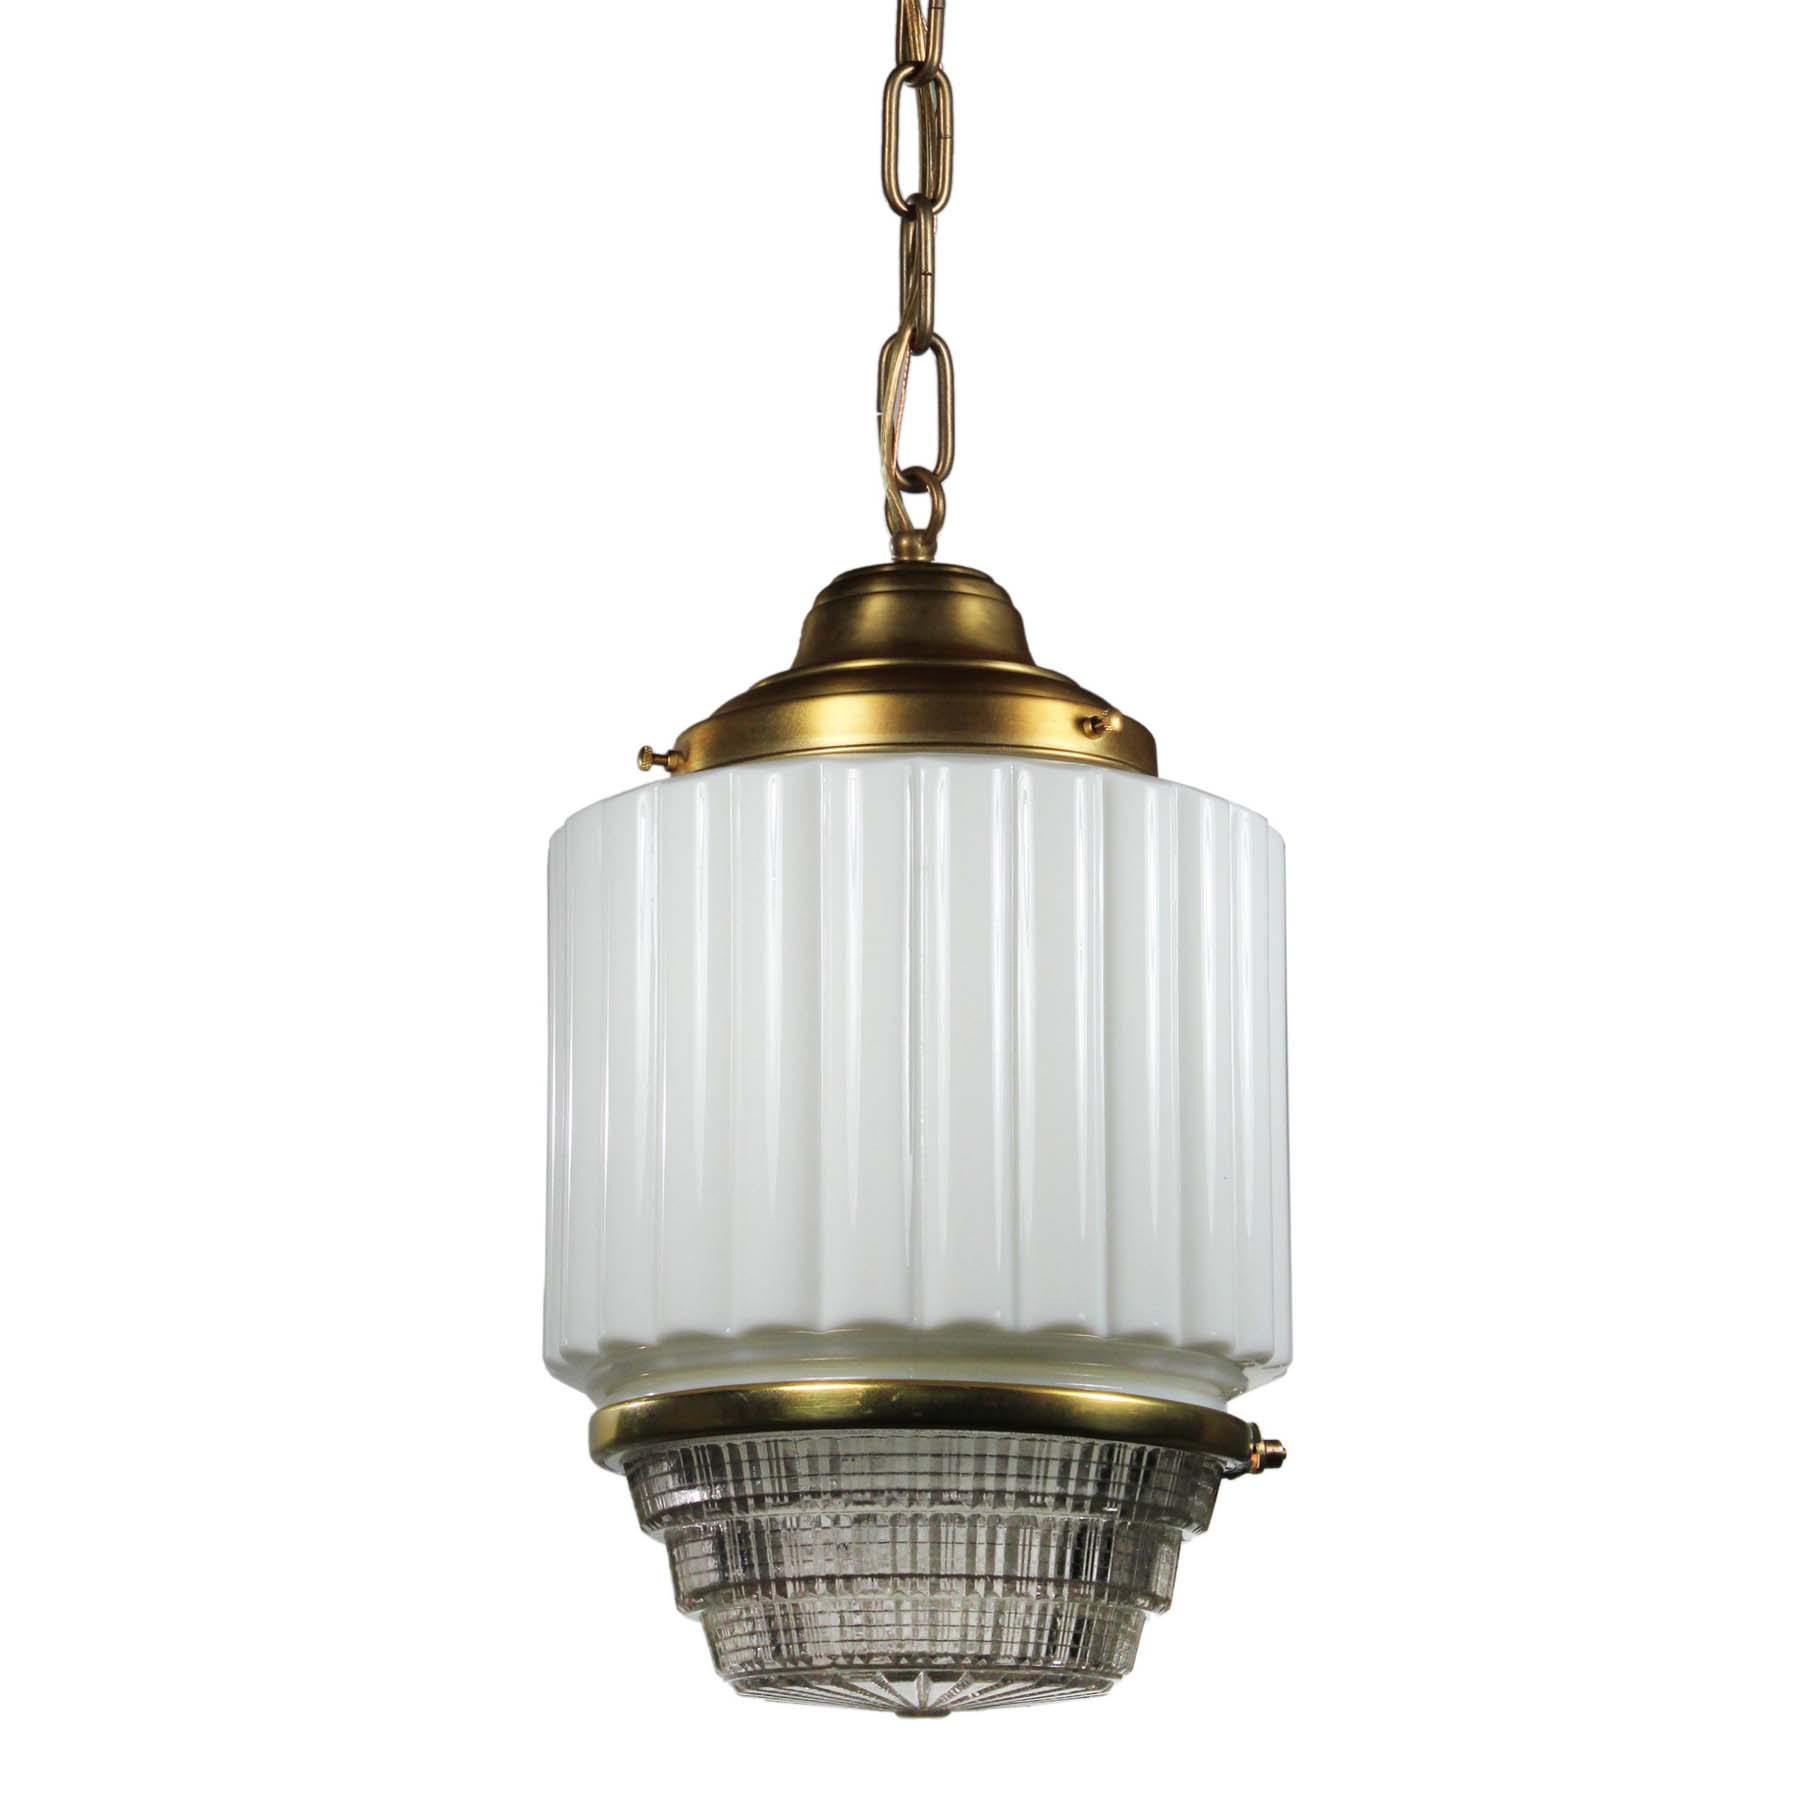 SOLD Antique Brass Art Deco Skyscraper Pendant Light with Two-Part Prismatic Shade-0